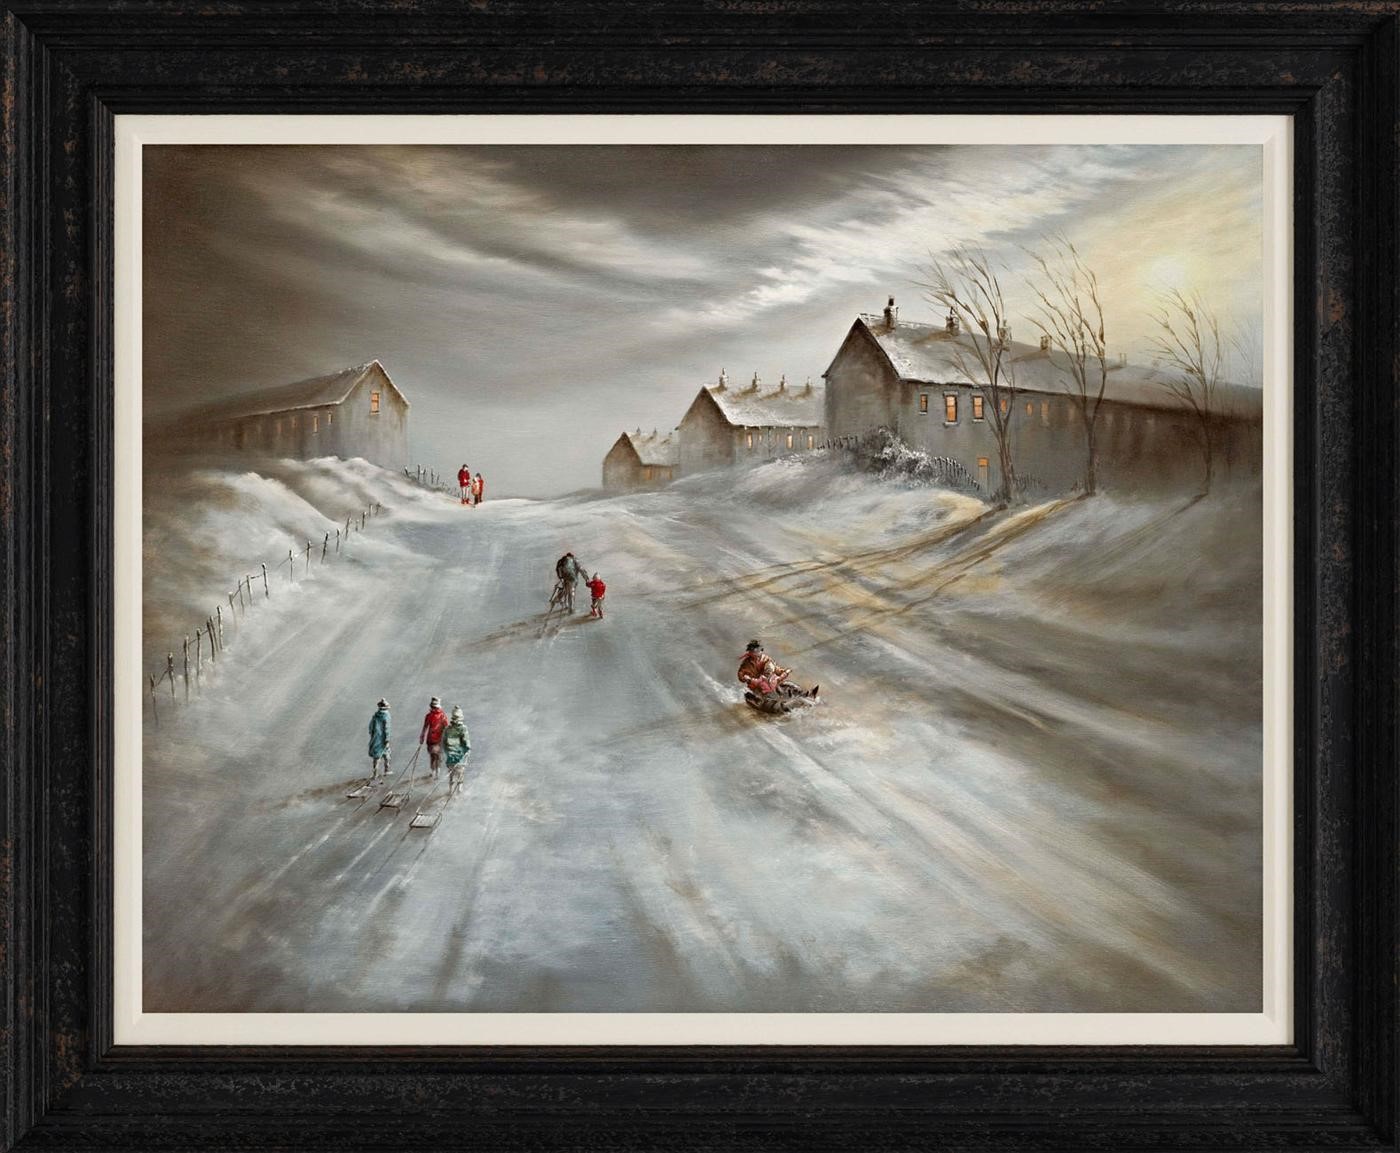 Whale of a Time by Bob Barker, Children | Nostalgic | Northern | Snow